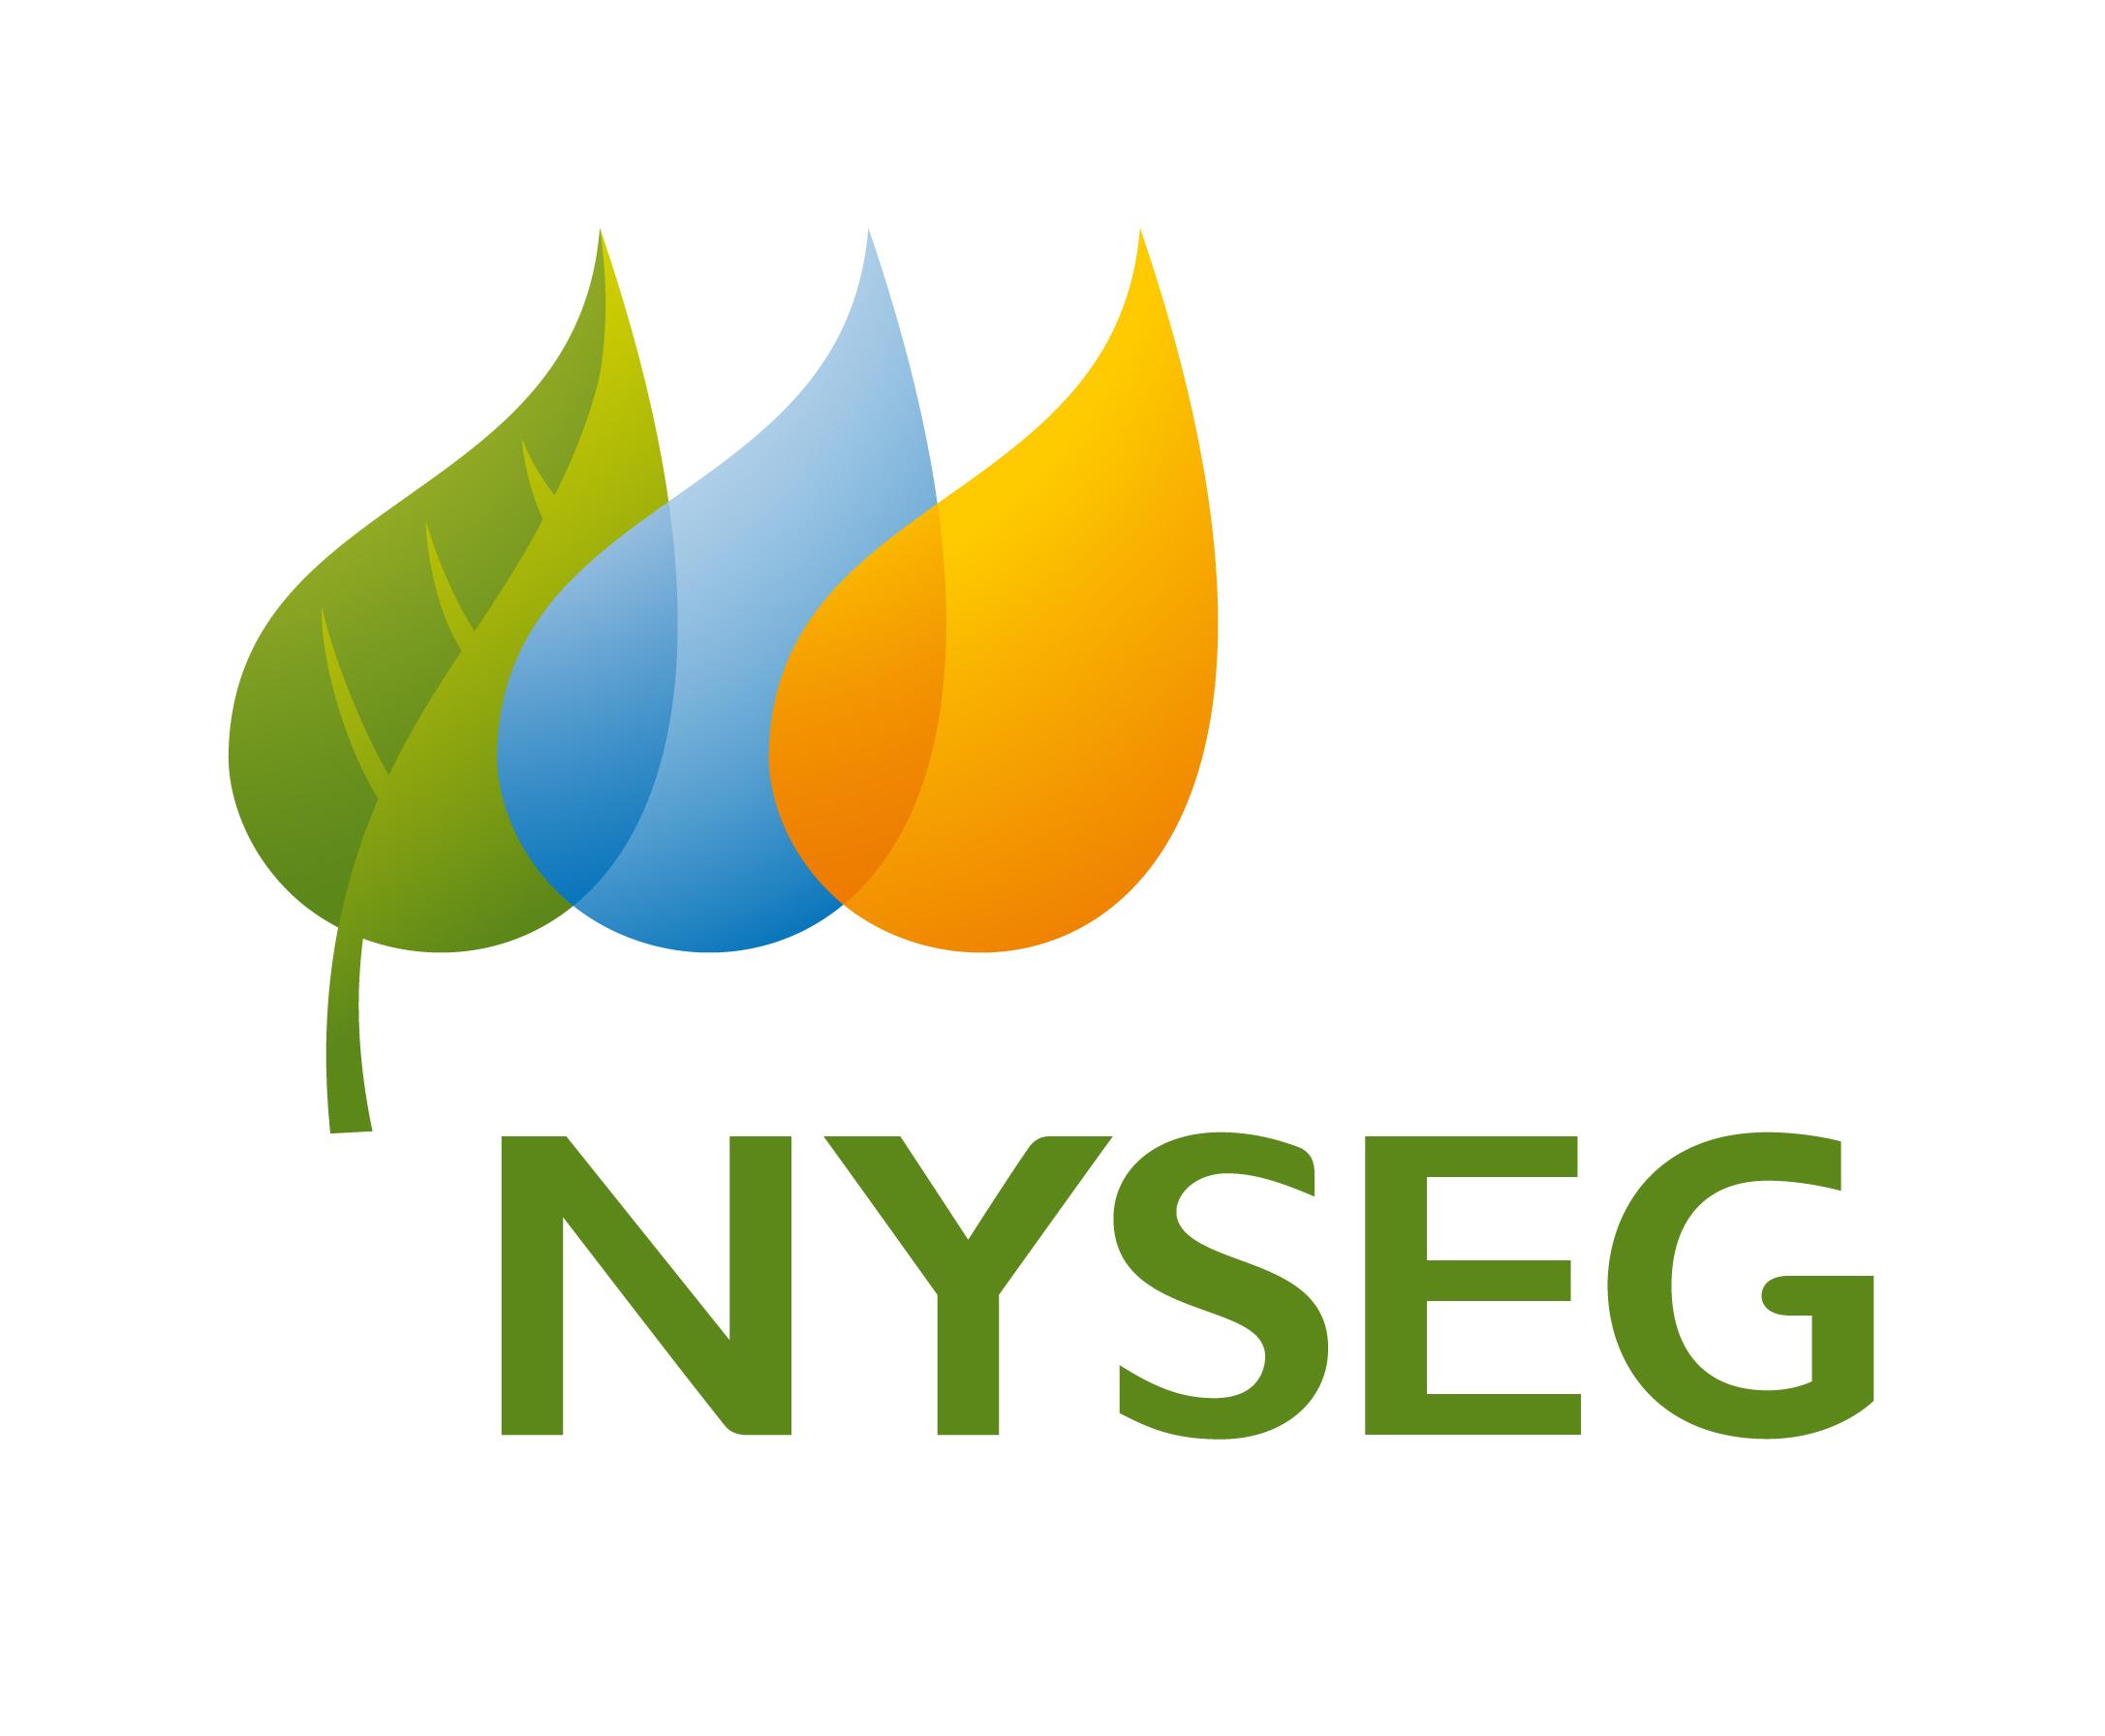 copper-theft-causes-nyseg-outage-wbfo